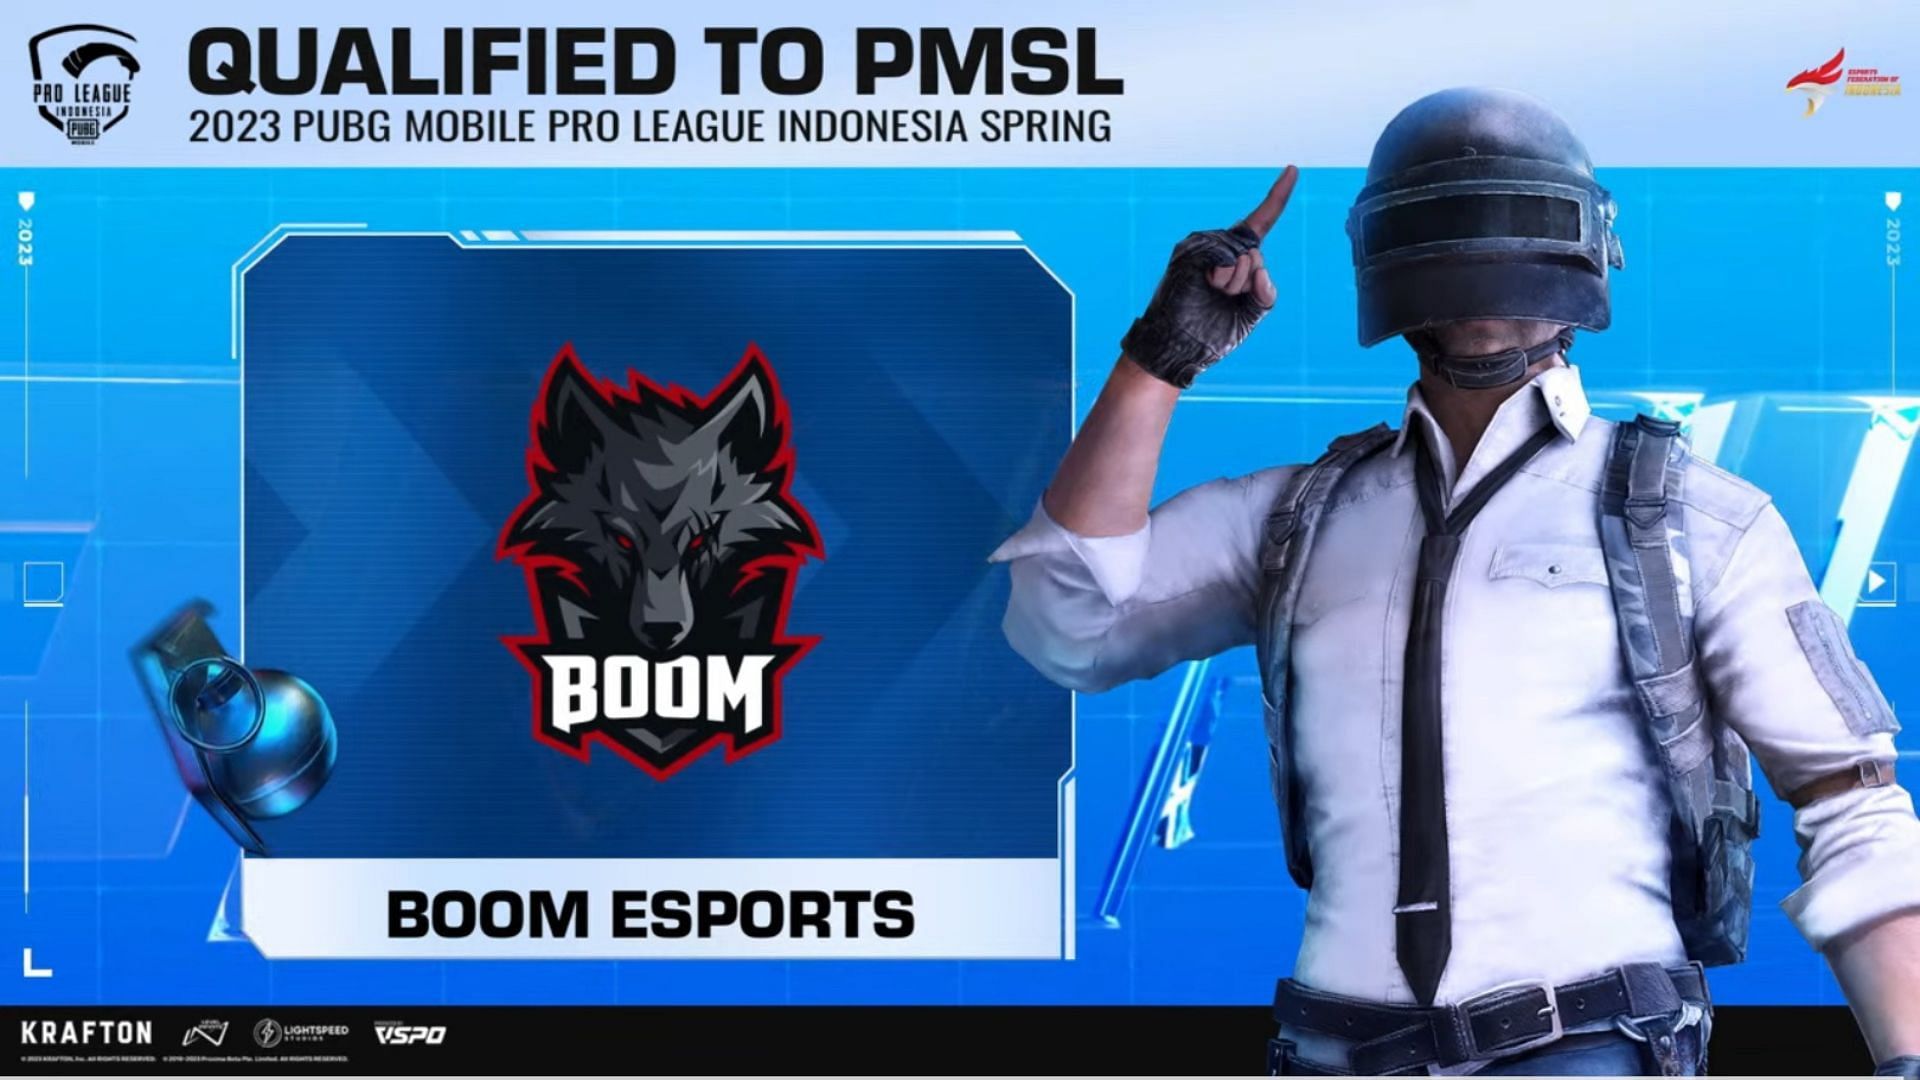 Boom Esports won PMPL Indonesia and qualified for PMSL 2023 (Image via PUBG Mobile)